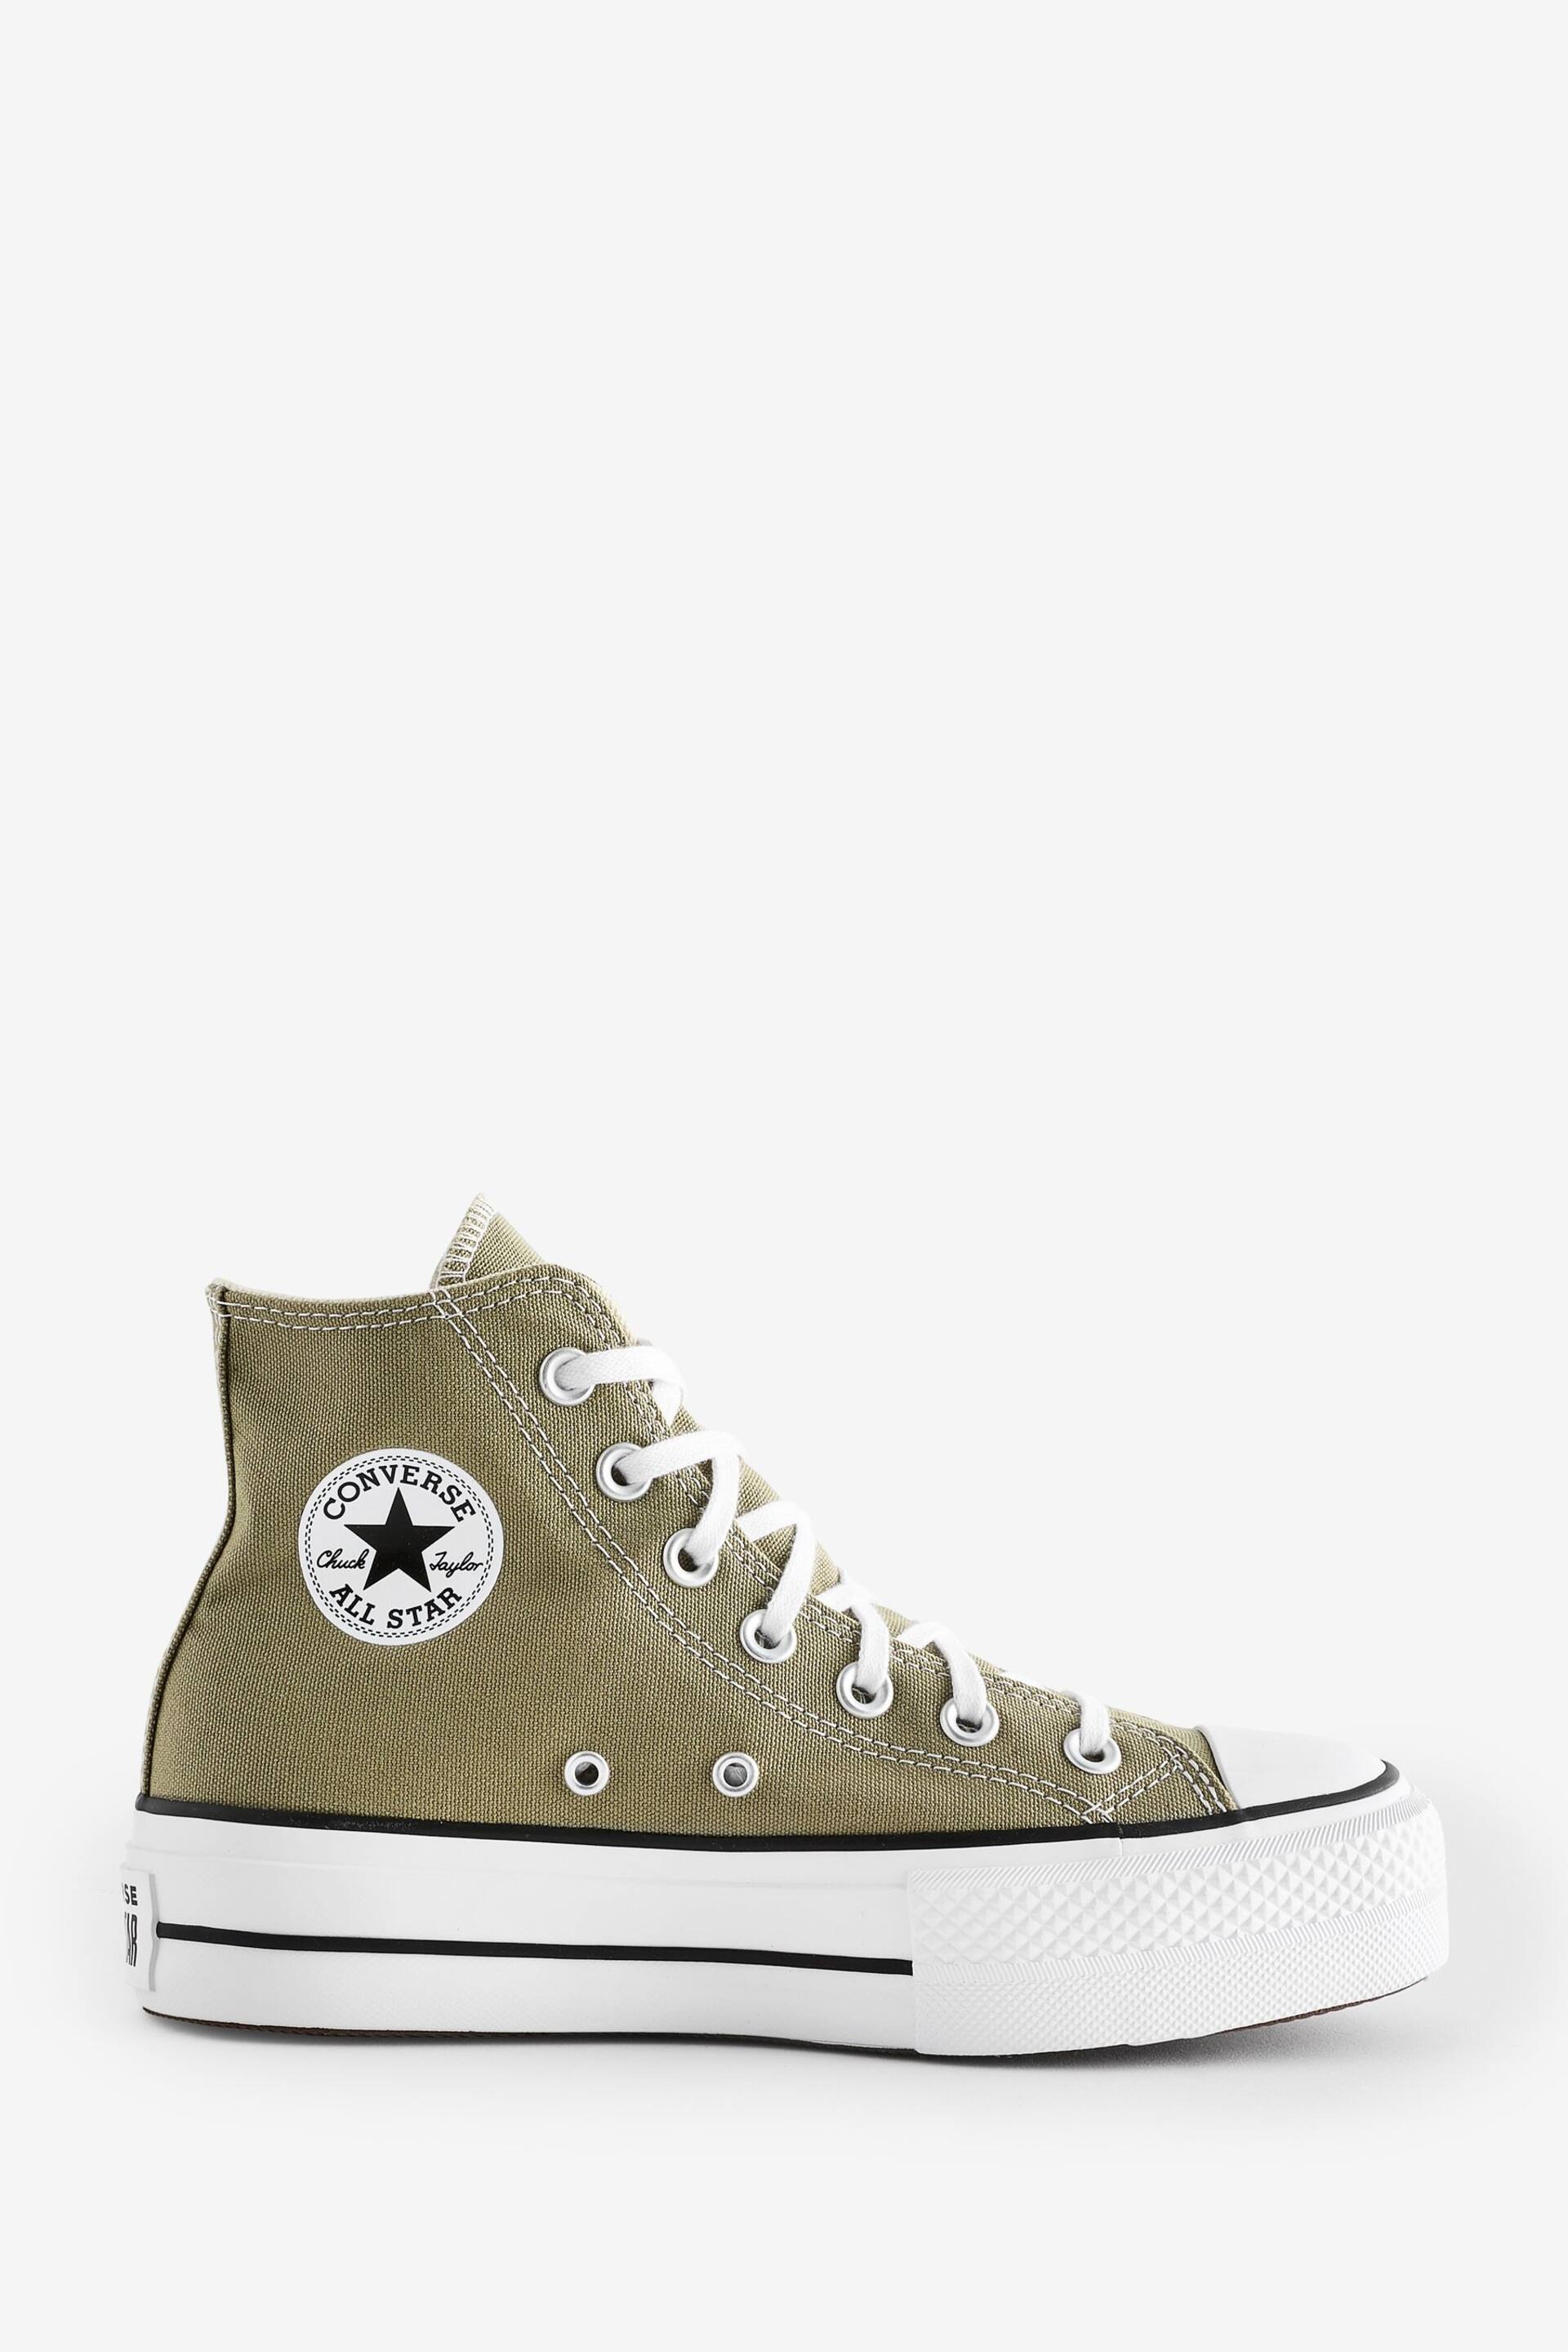 Converse Khaki Green Chuck Taylor All Star High Top Lift Trainers - Image 1 of 9